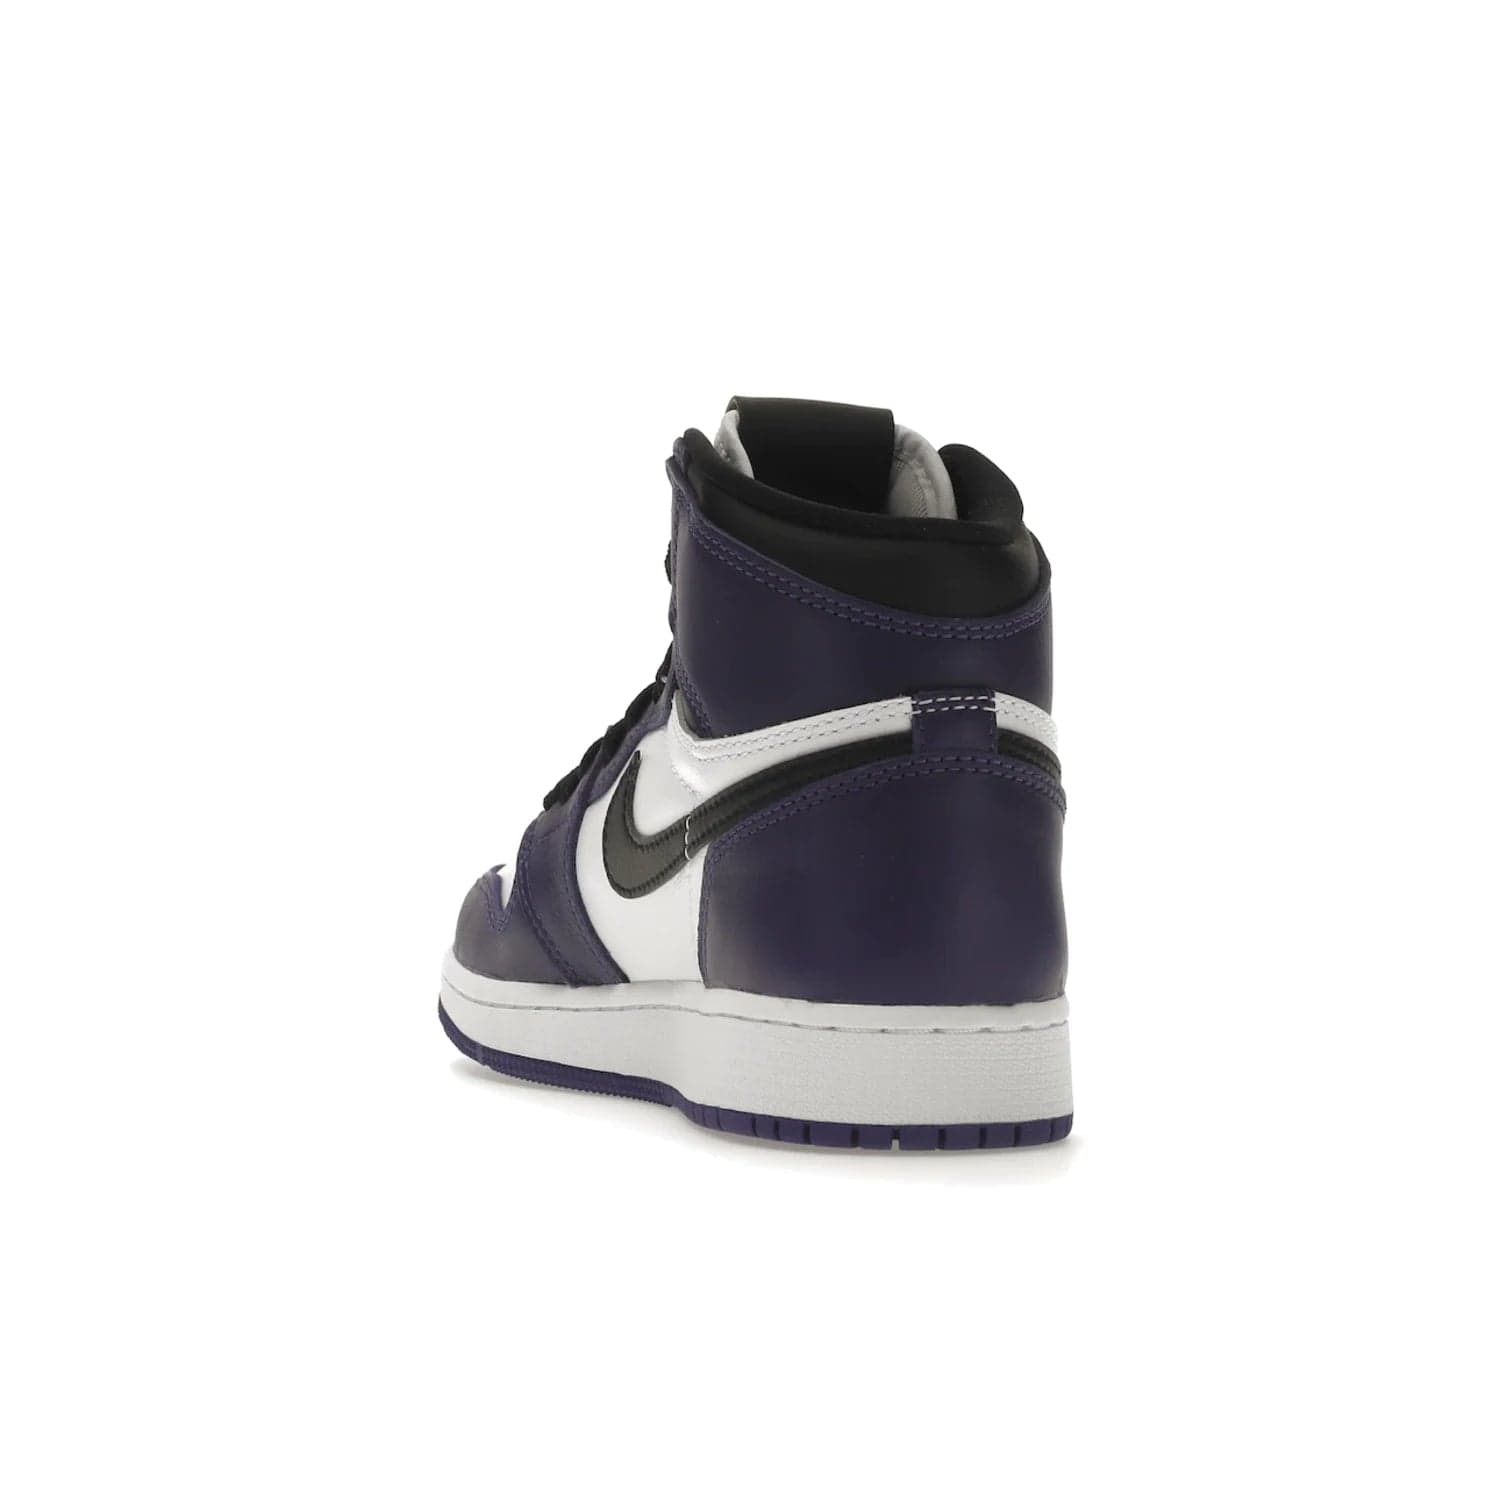 Jordan 1 Retro High Court Purple White (GS) - Image 26 - Only at www.BallersClubKickz.com - The Air Jordan 1 Retro High Court Purple is here and young sneaker heads can show off classic style. Features a white tumbled leather upper, black swoosh, purple overlays, black collar with purple overlay, white tongue, black patch with purple Nike Air logo and swoosh, white midsole, and purple rubber outsole with circular pattern.